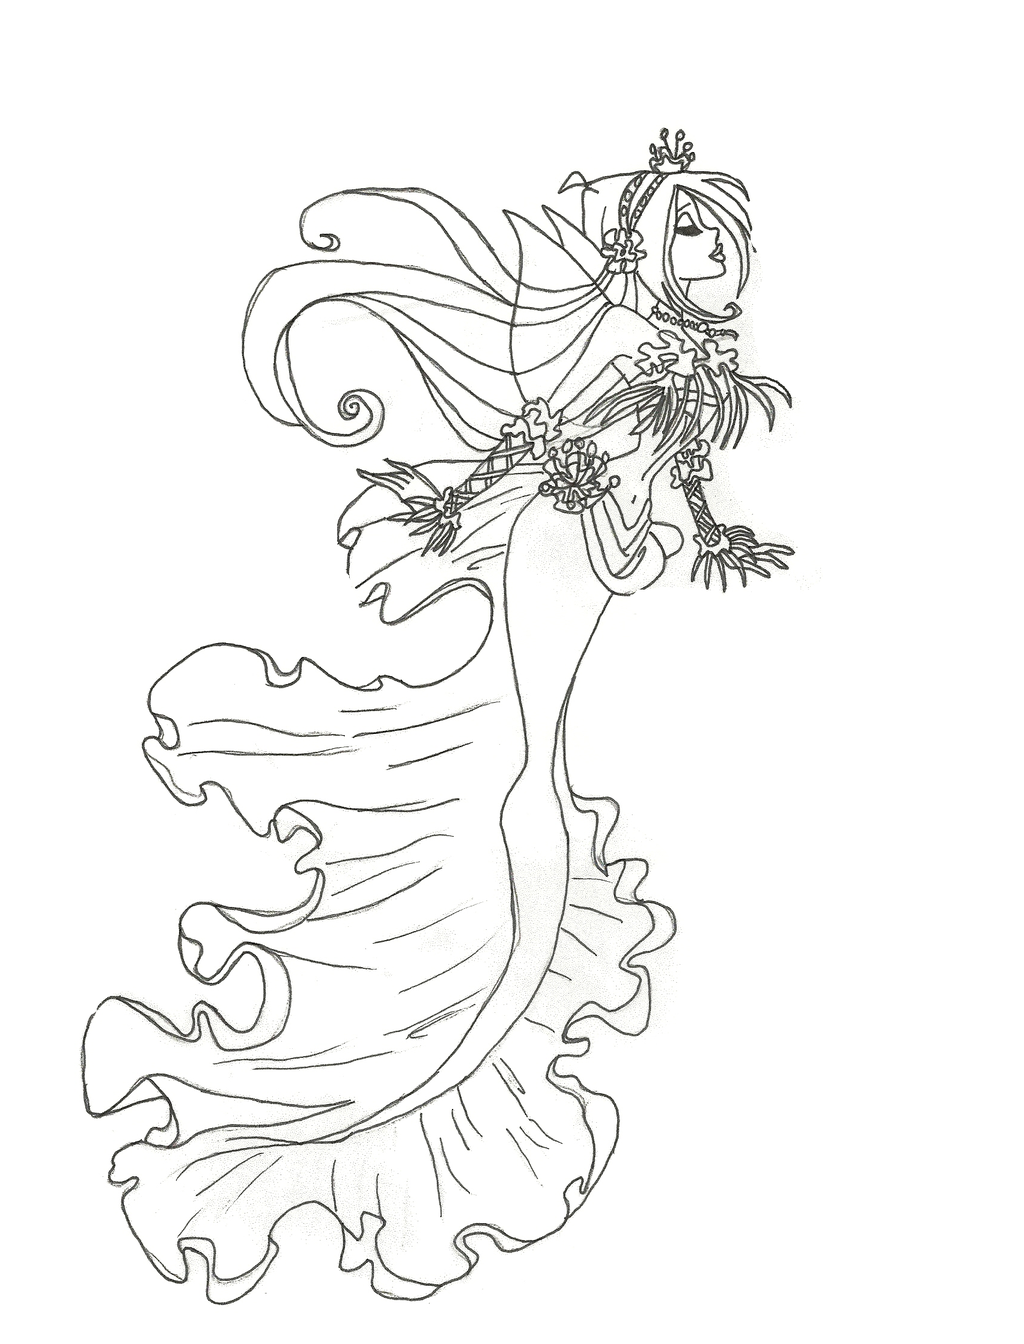 Angel And Mermaid Coloring Pages - Coloring Pages For All Ages